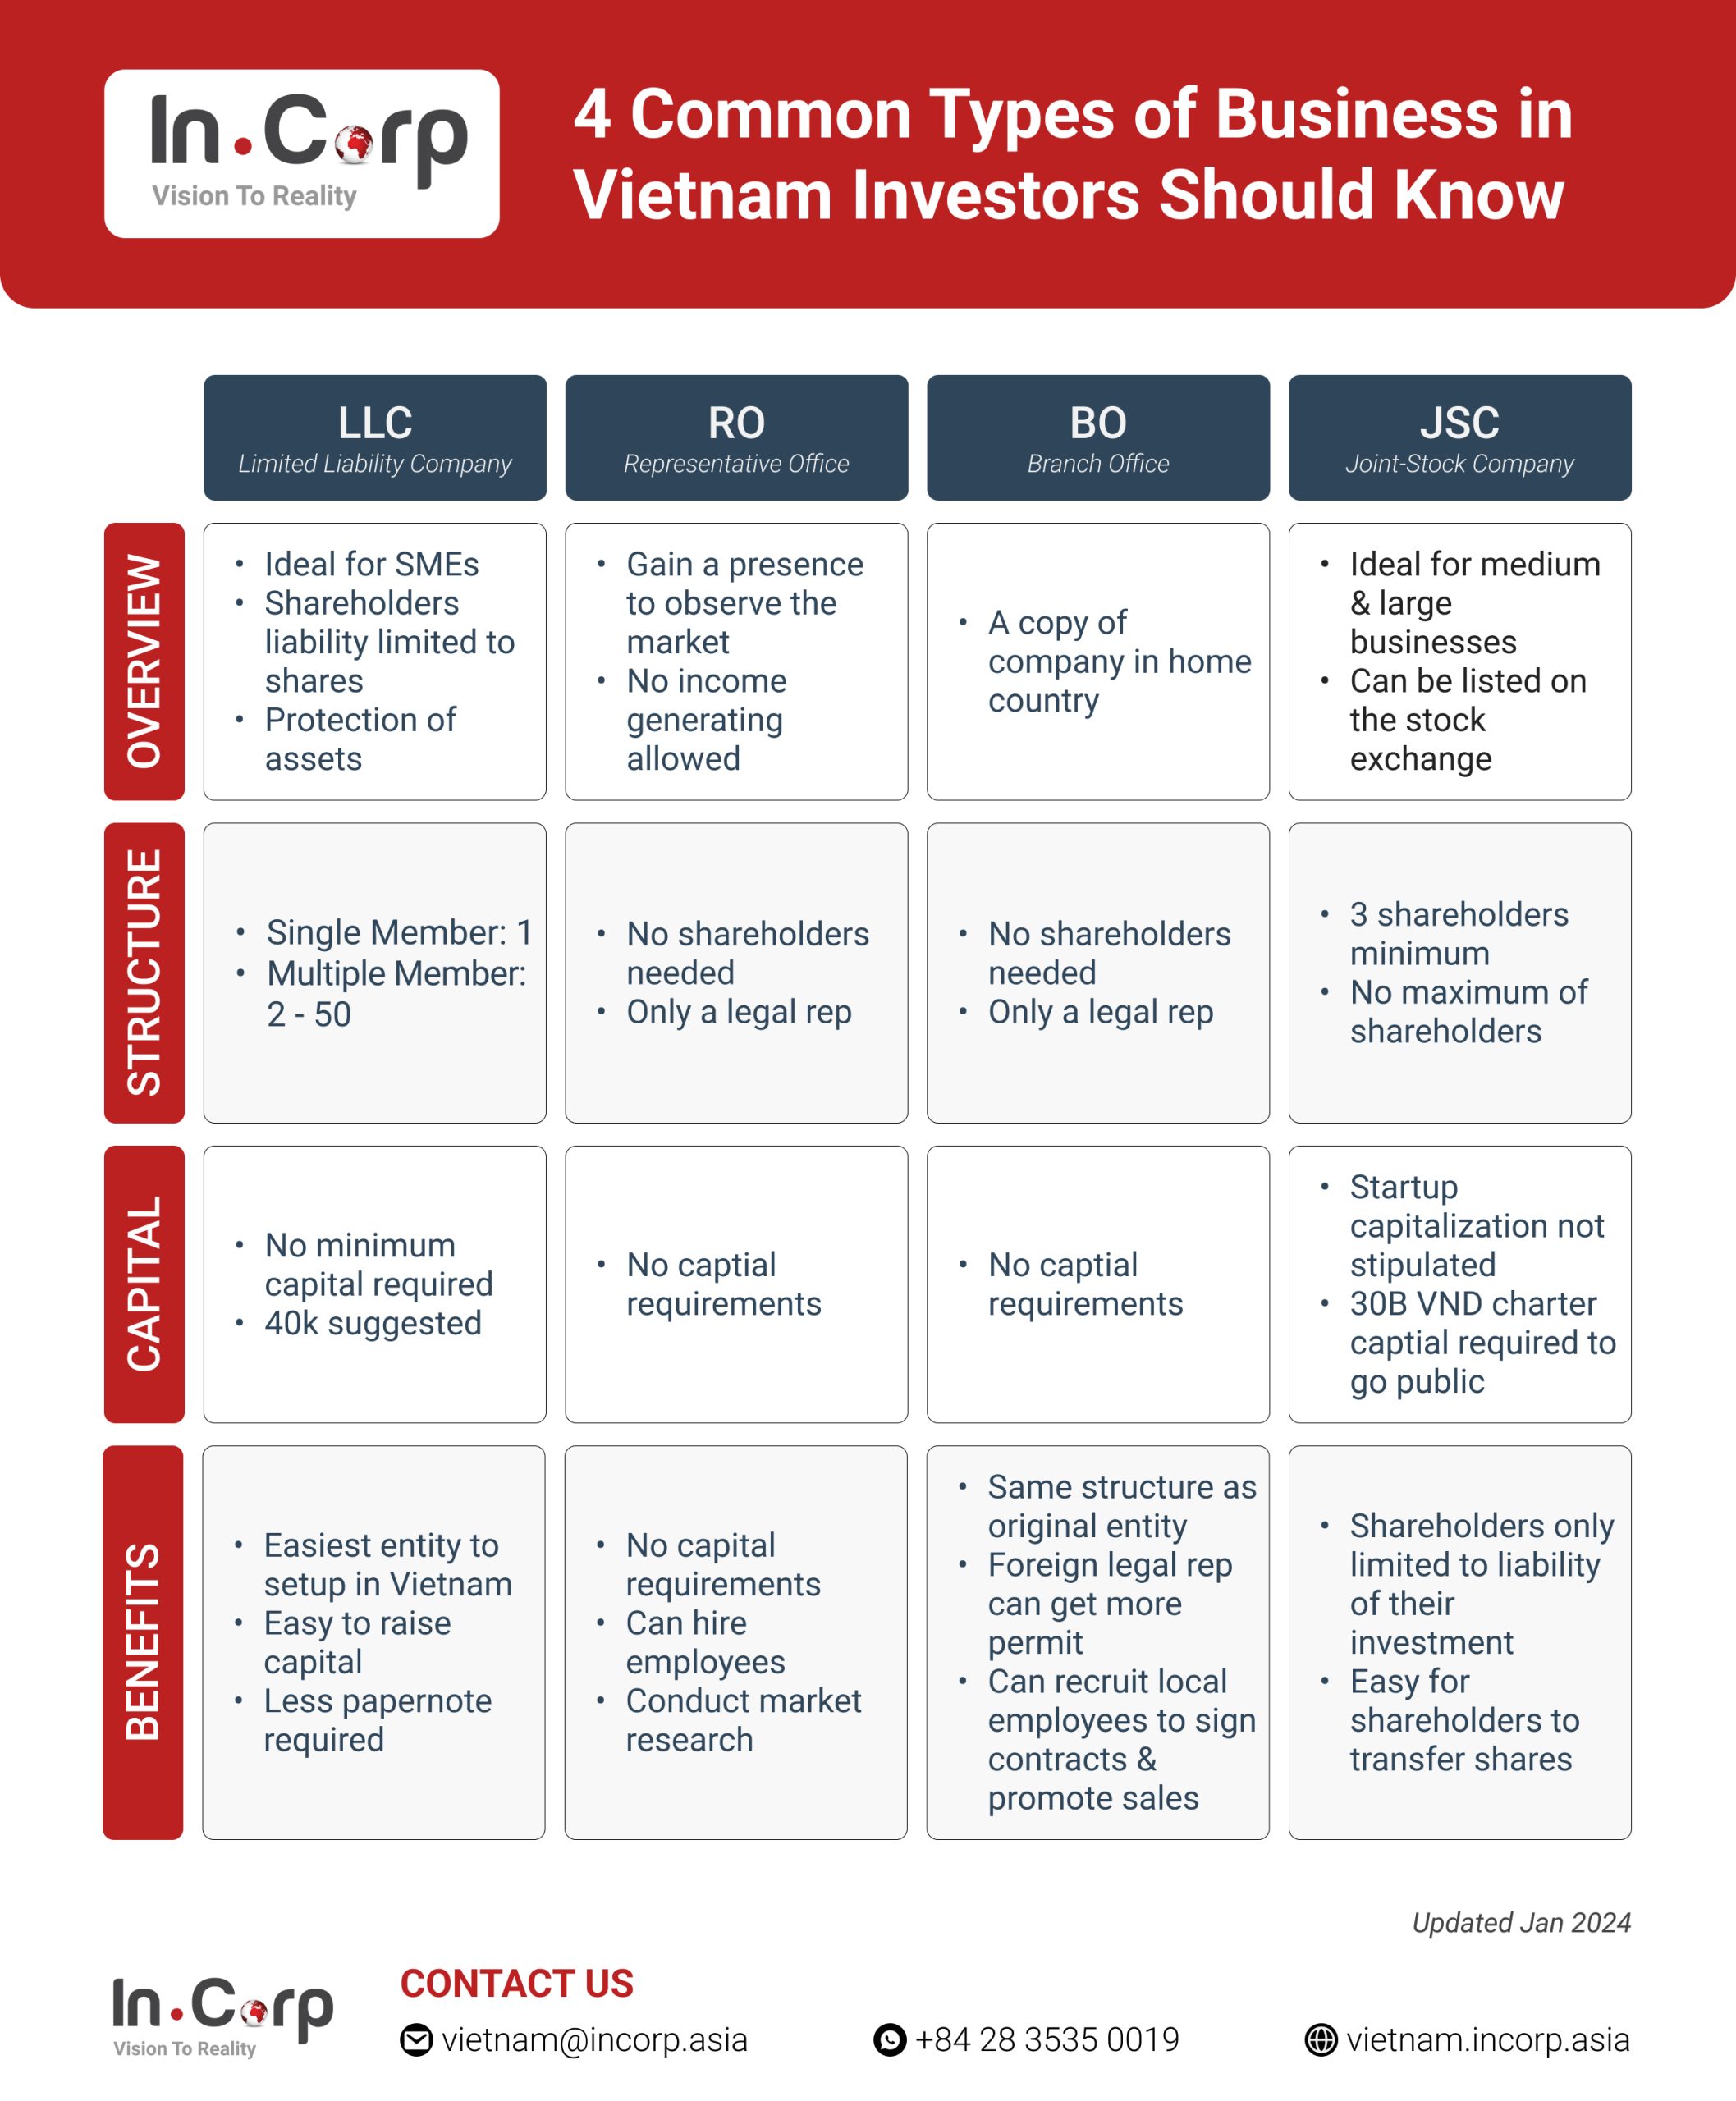 4 Common Types of Business in Vietnam Investors Should Know